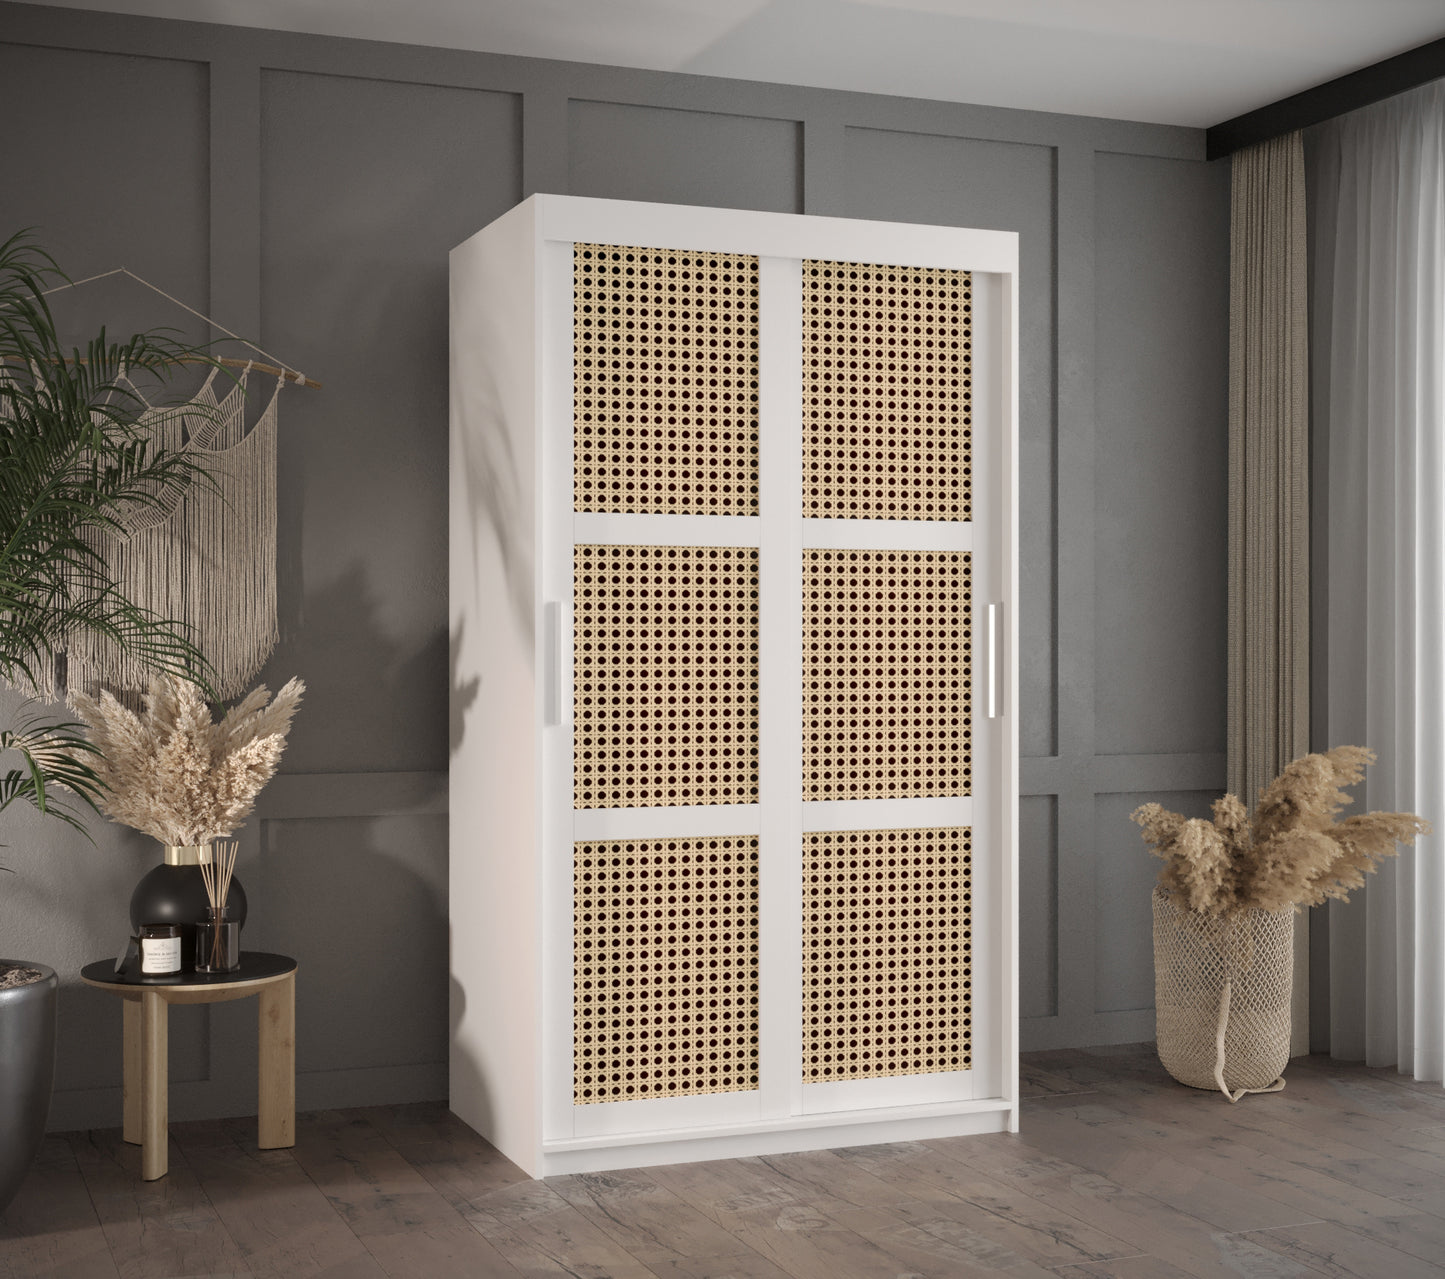 VIENNA- Wardrobe with 2 Sliding Doors Black or White with Shelves, Rails, Drawers Optional > 100cm <